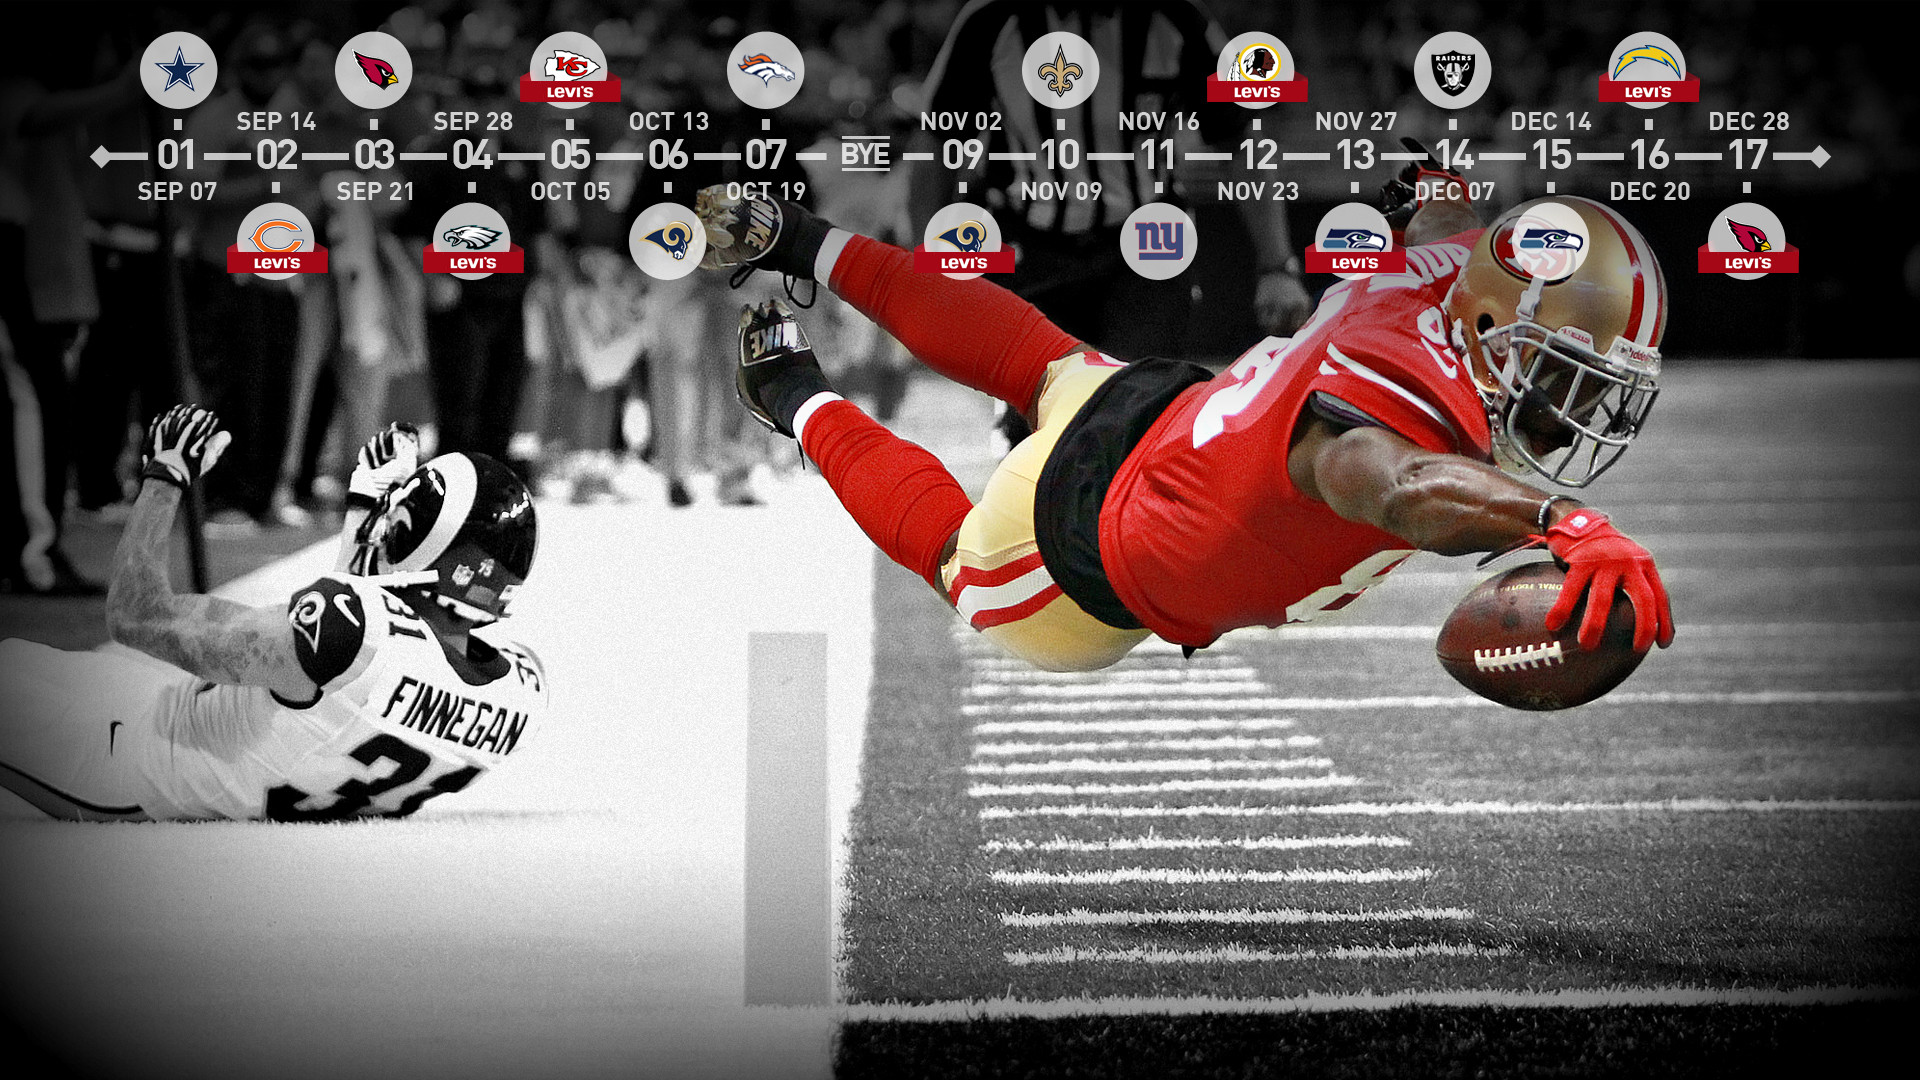 49ers Schedule 2015 for Pinterest